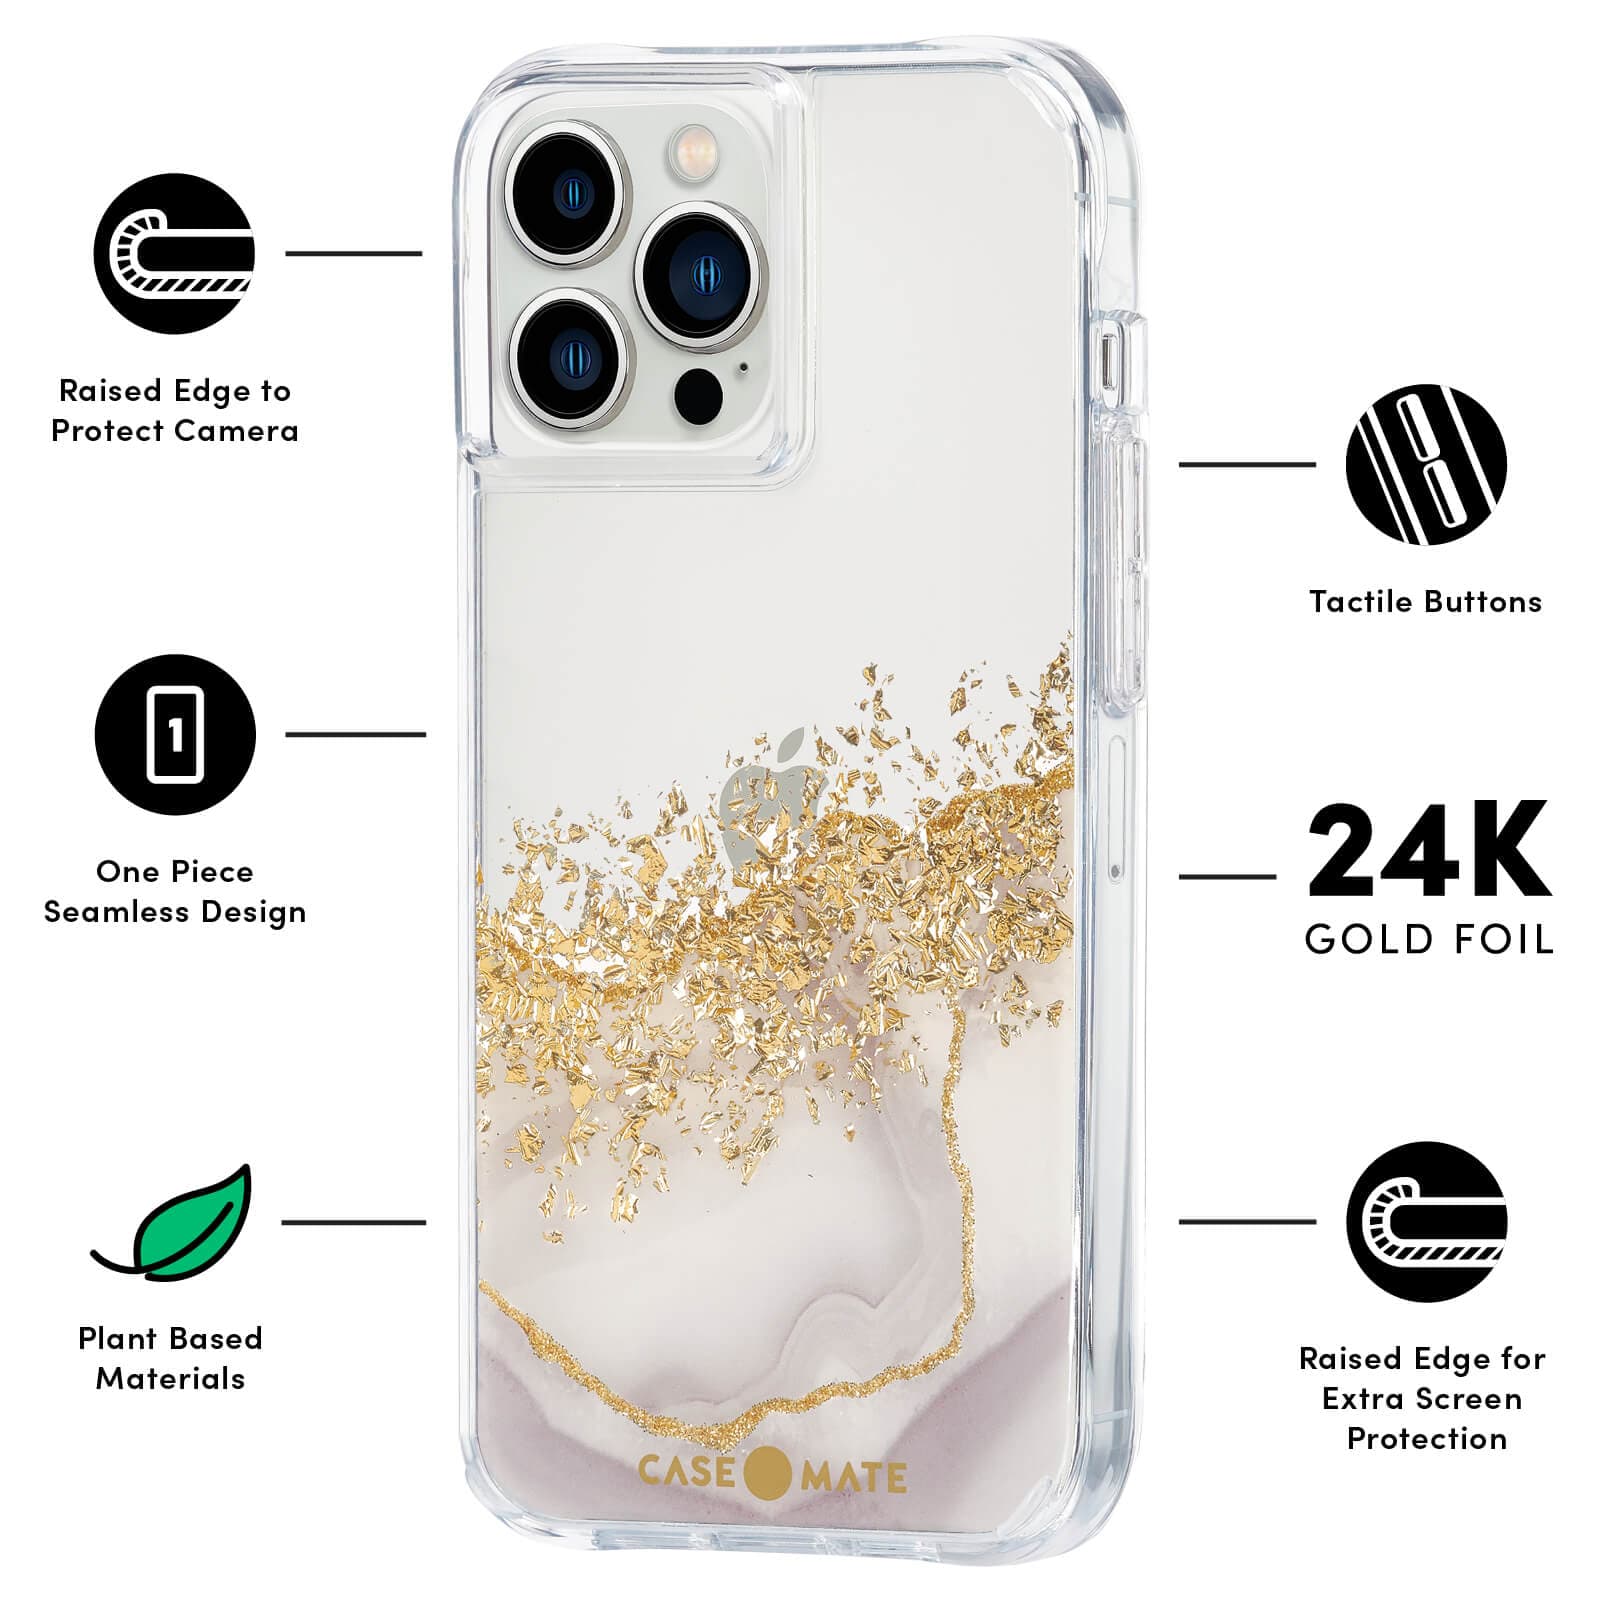 Features: Raised edge to protect camera, one piece seamless design, plant based materials, tactile buttons, 24k gold foil, raised edge for extra screen protection. color::Karat Marble